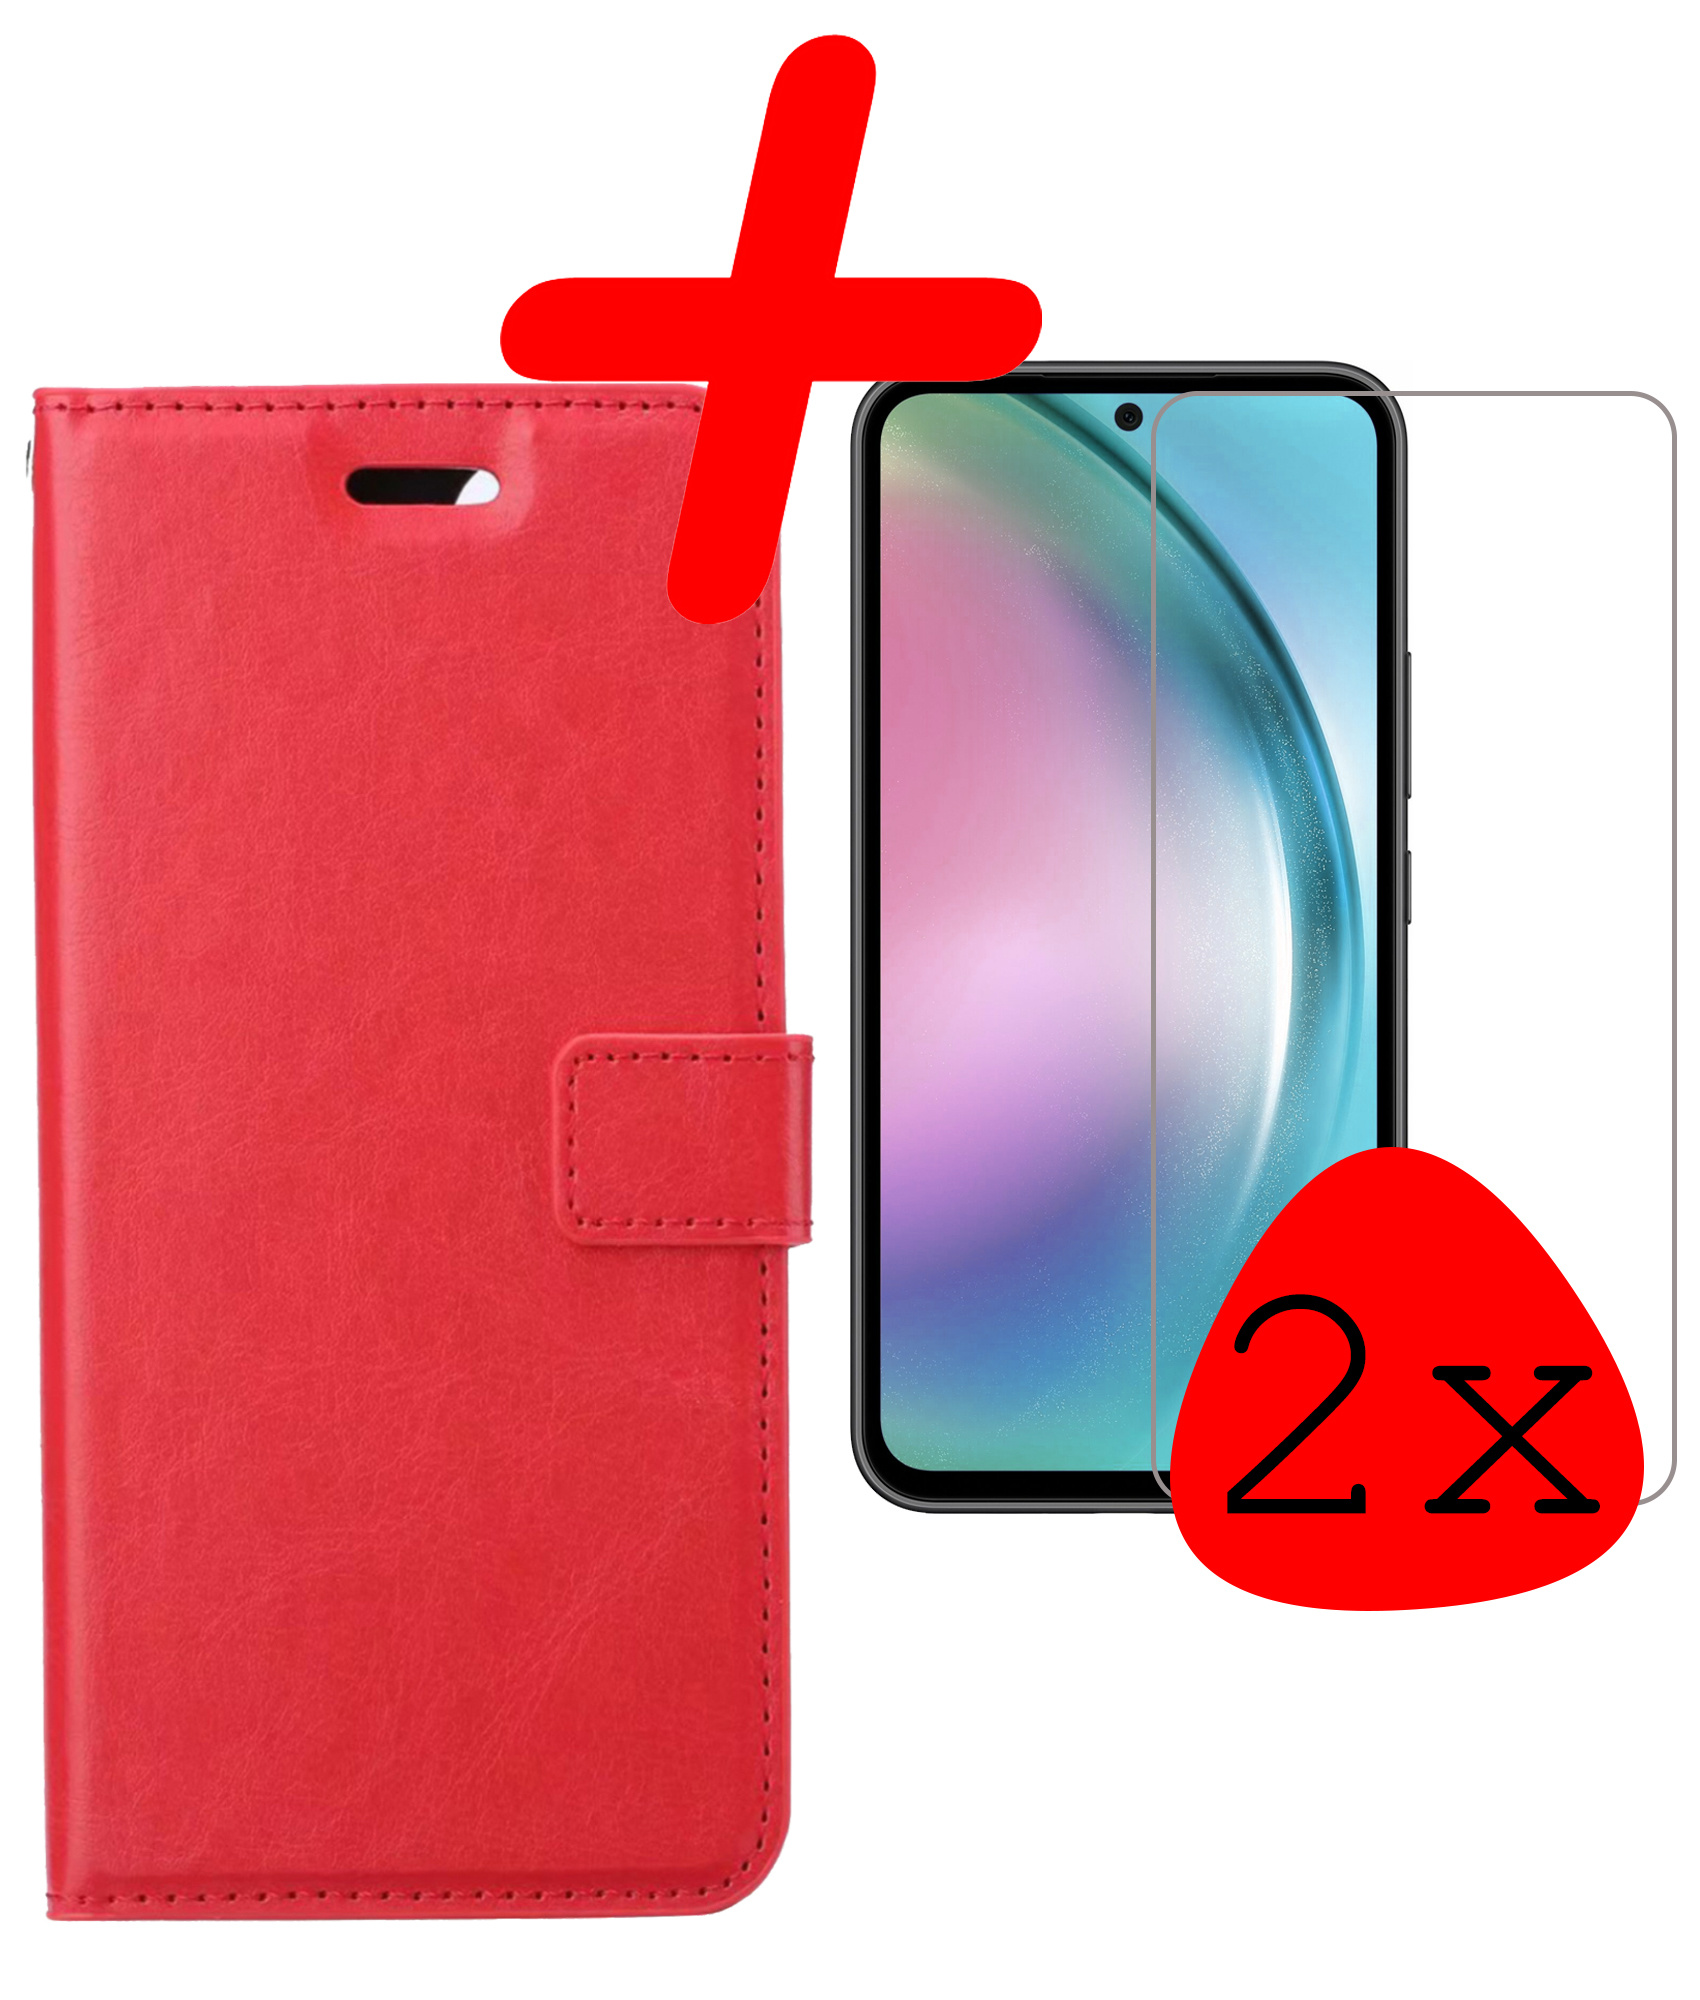 Samsung Galaxy A54 Hoesje Bookcase Hoes Flip Case Book Cover 2x Met Screenprotector - Samsung A54 Hoes Book Case Hoesje - Donkerroze